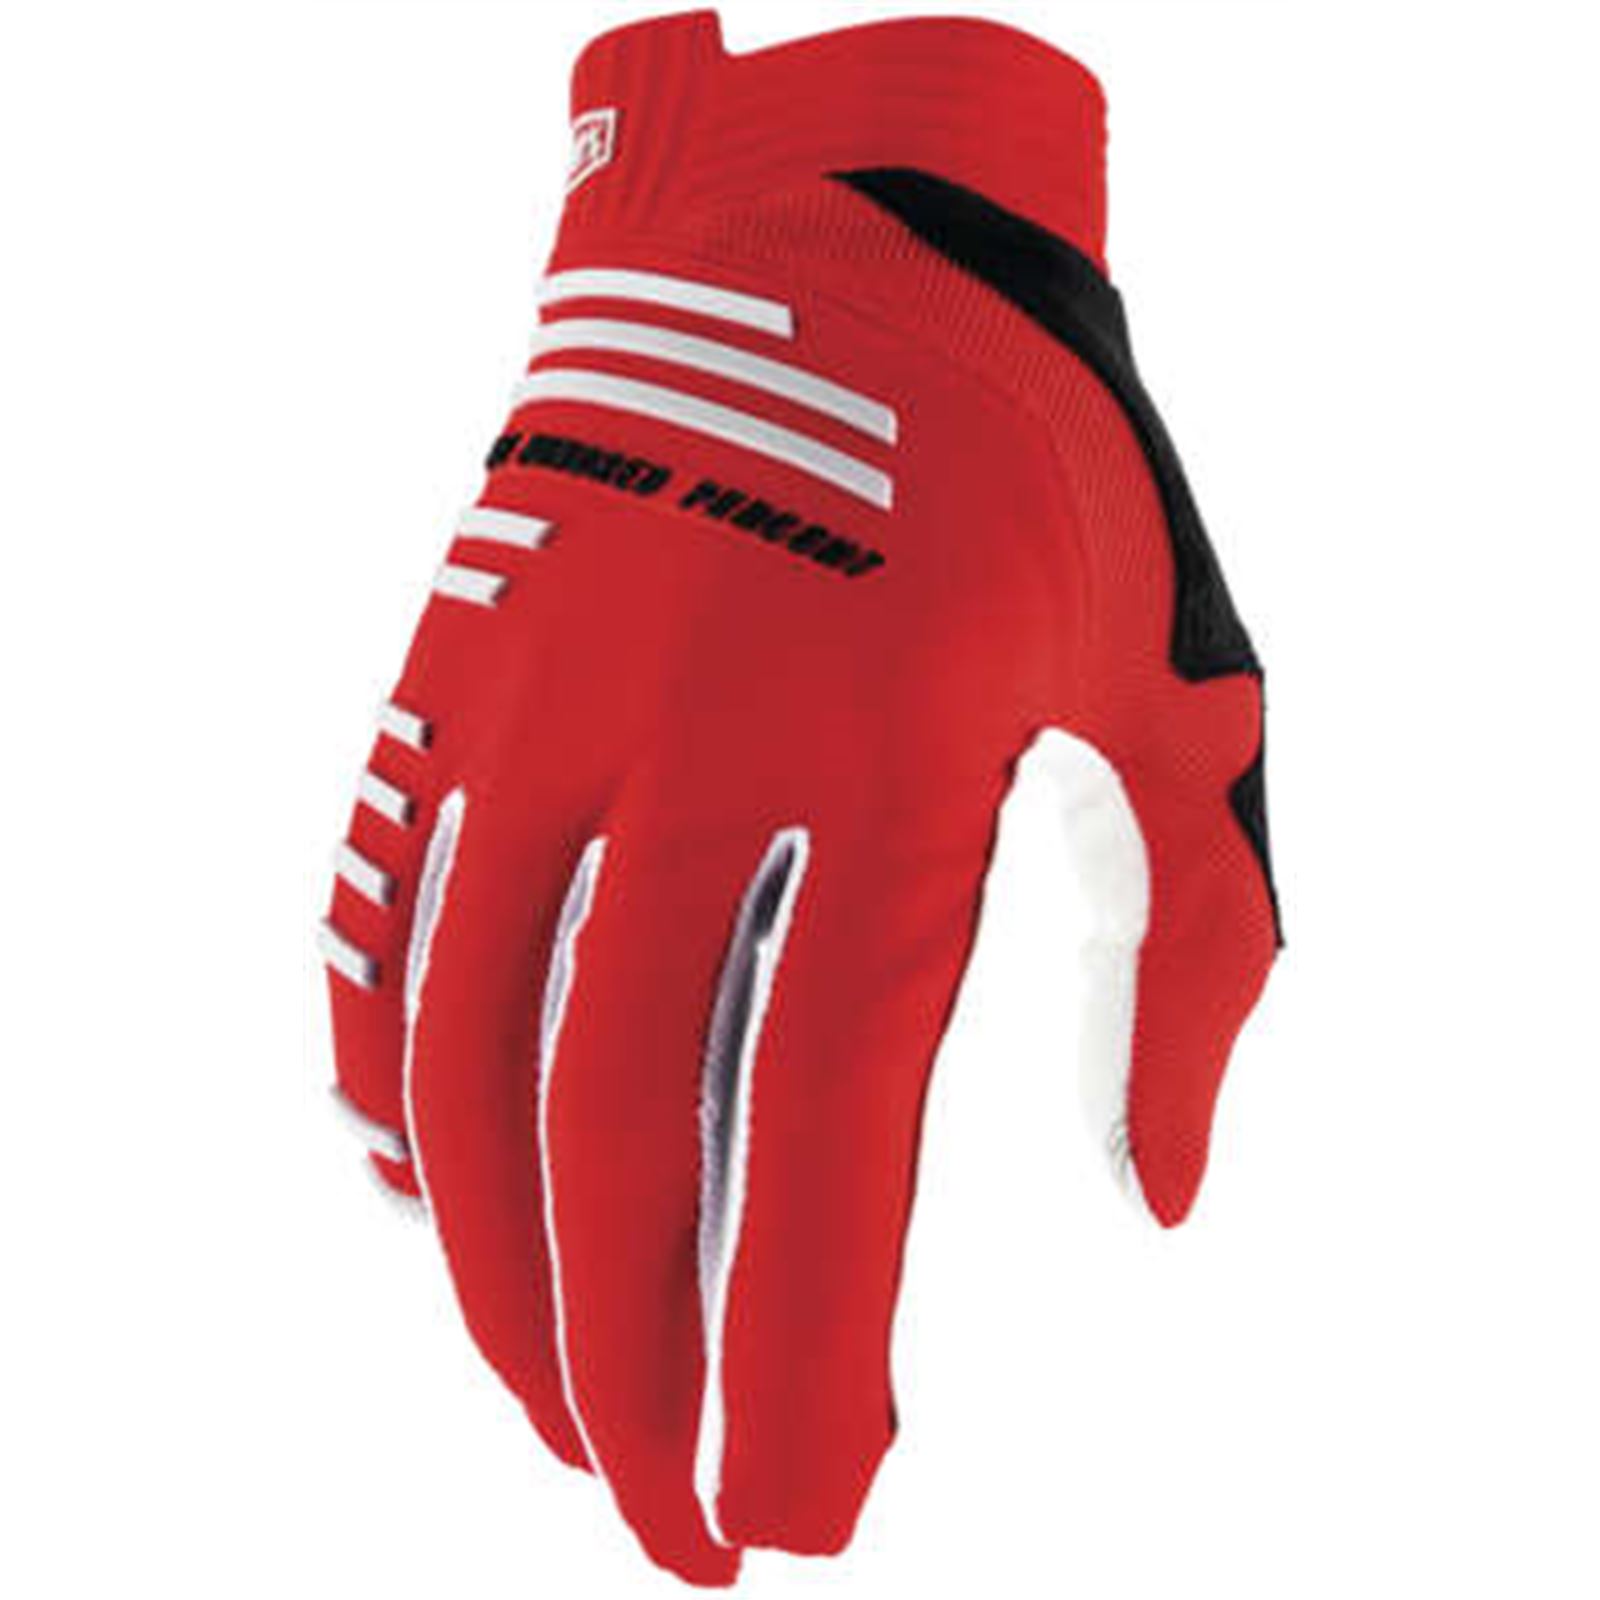 100% Men's R-Core Gloves Racer Red, Small